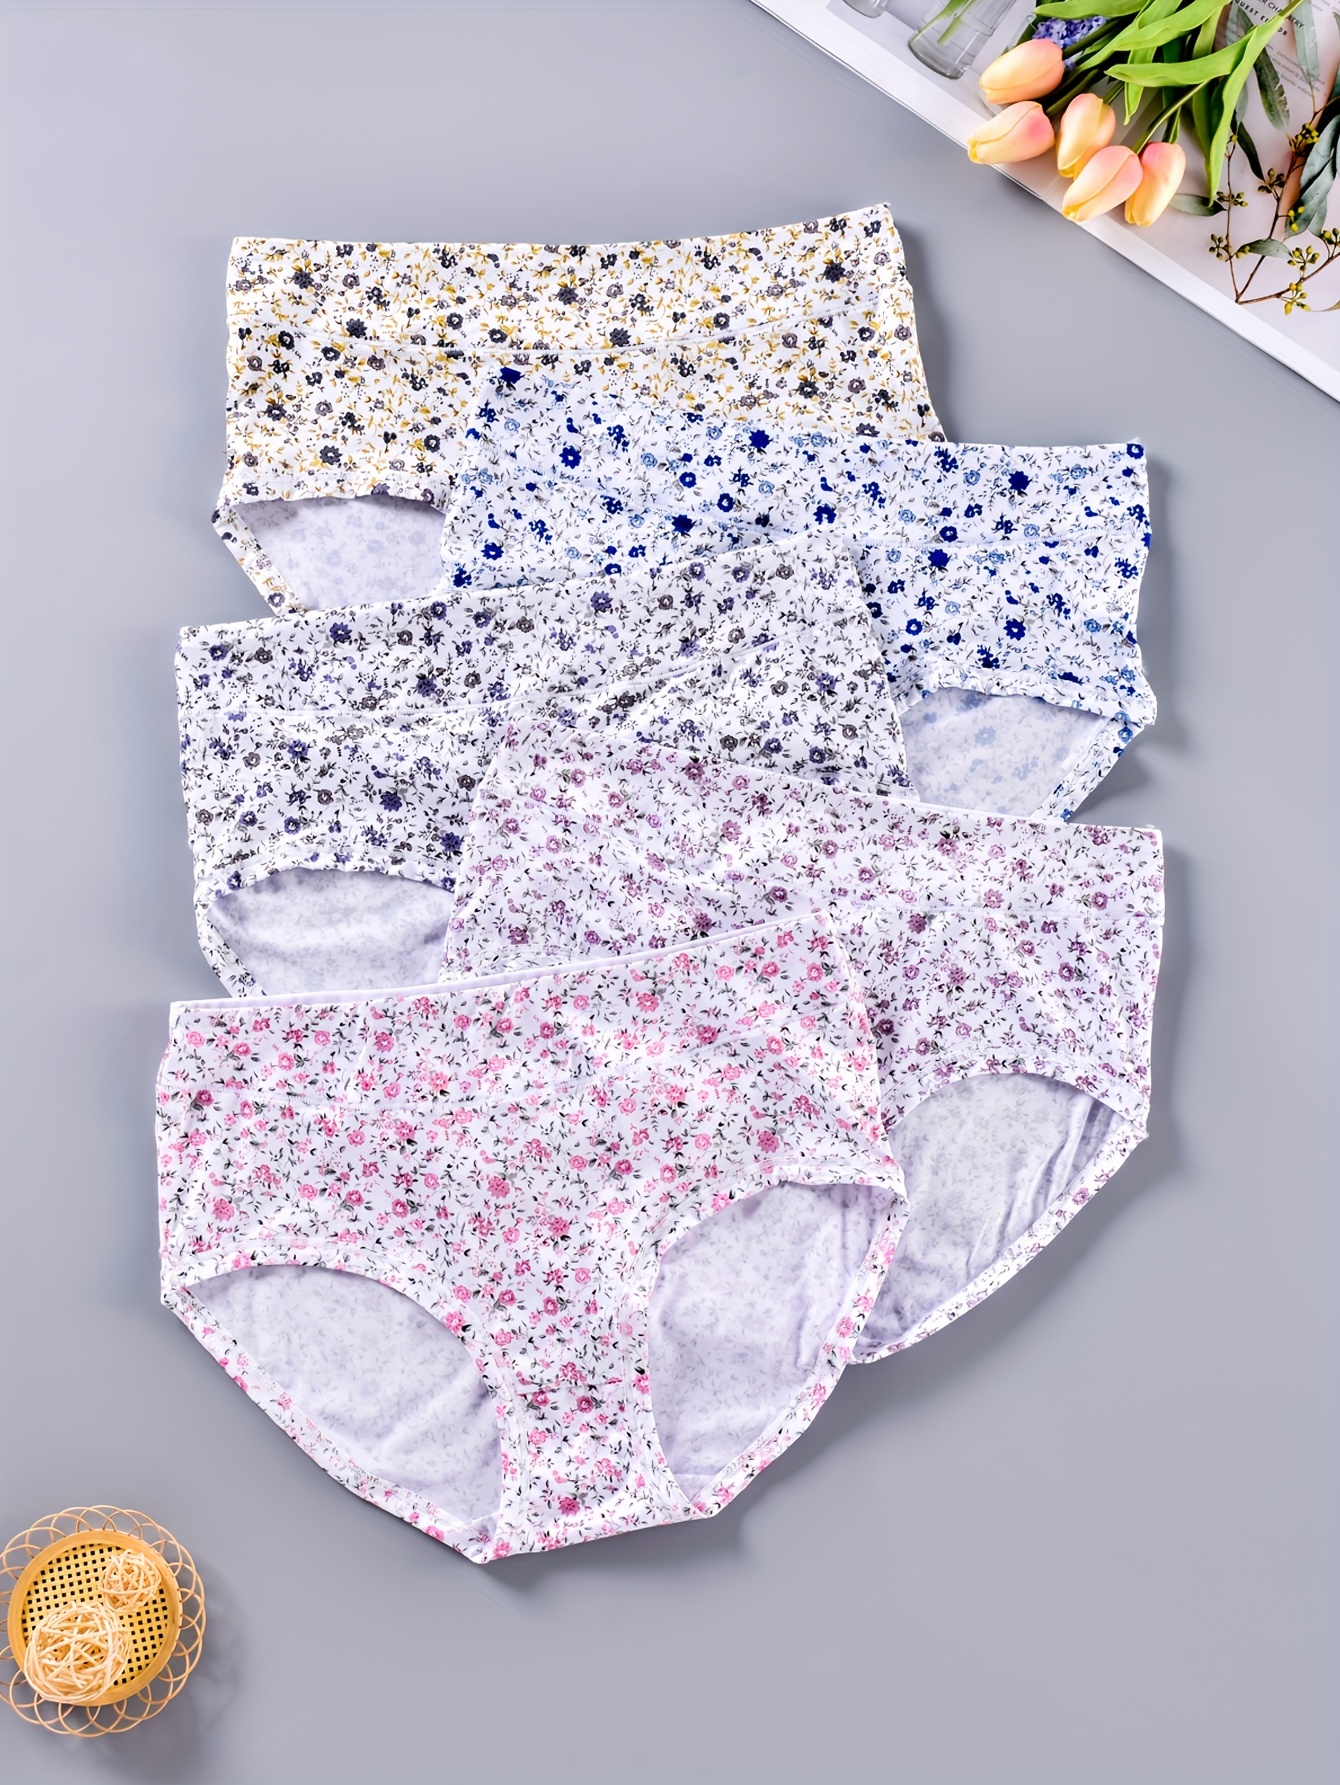 Women's Panties With Floral Print,Large Size Women's Underwear